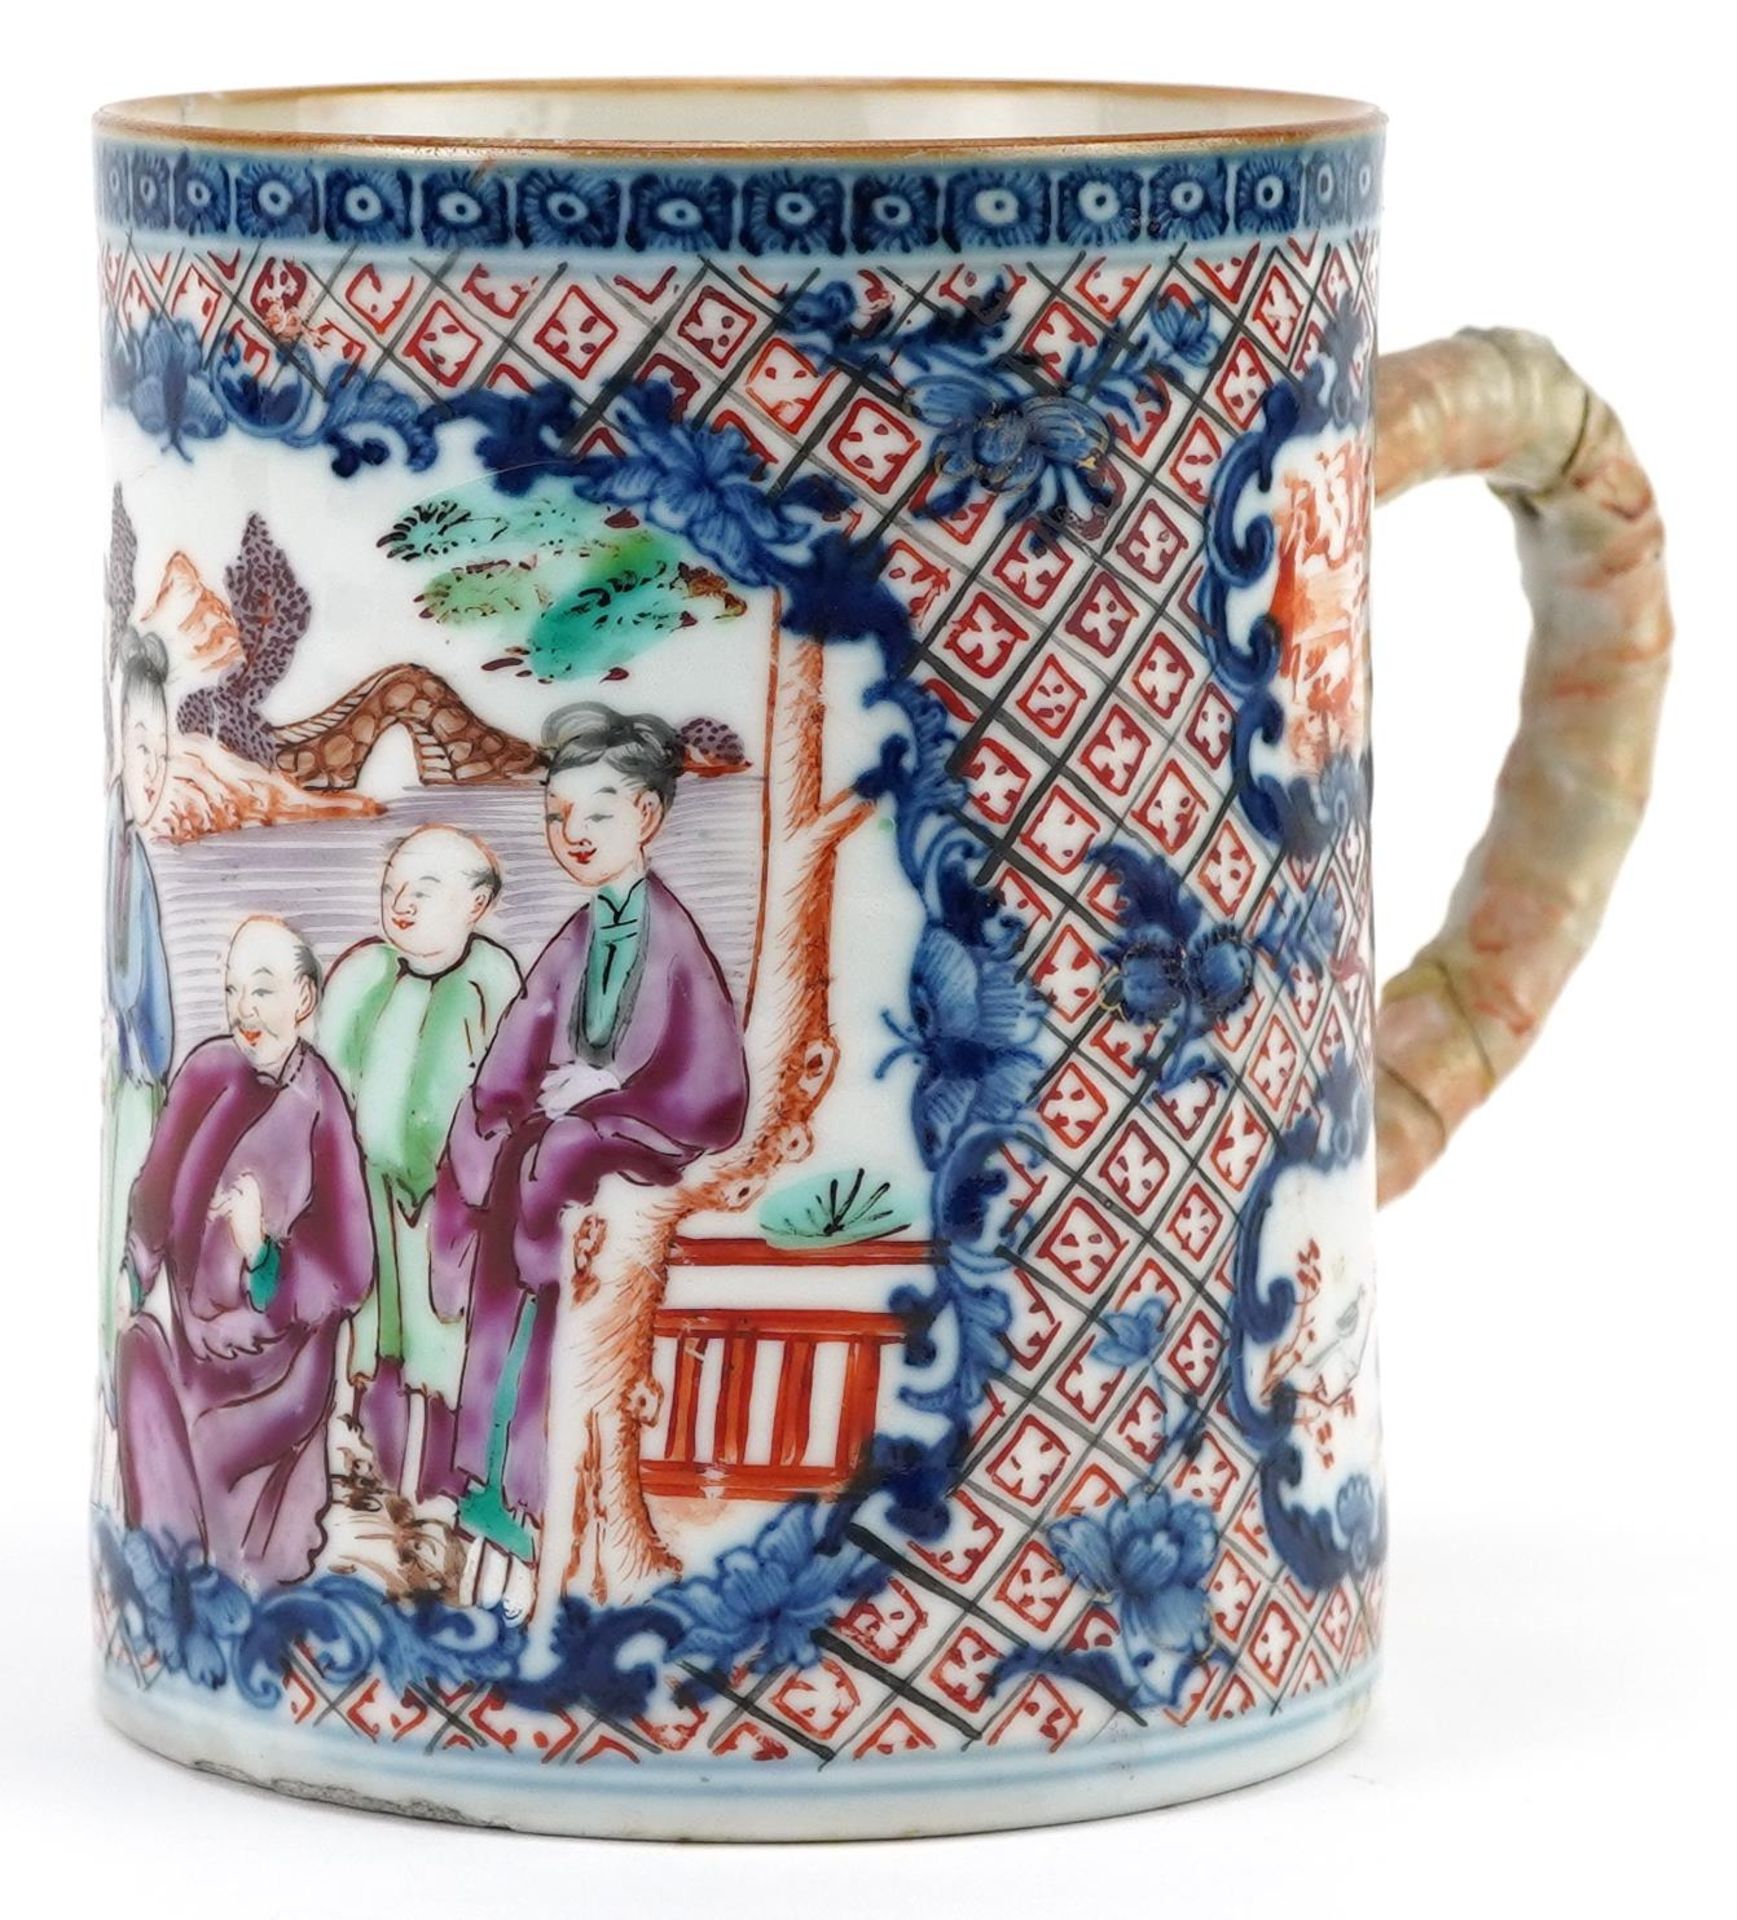 Chinese Mandarin porcelain tankard hand painted in the famille rose palette with figures in a palace